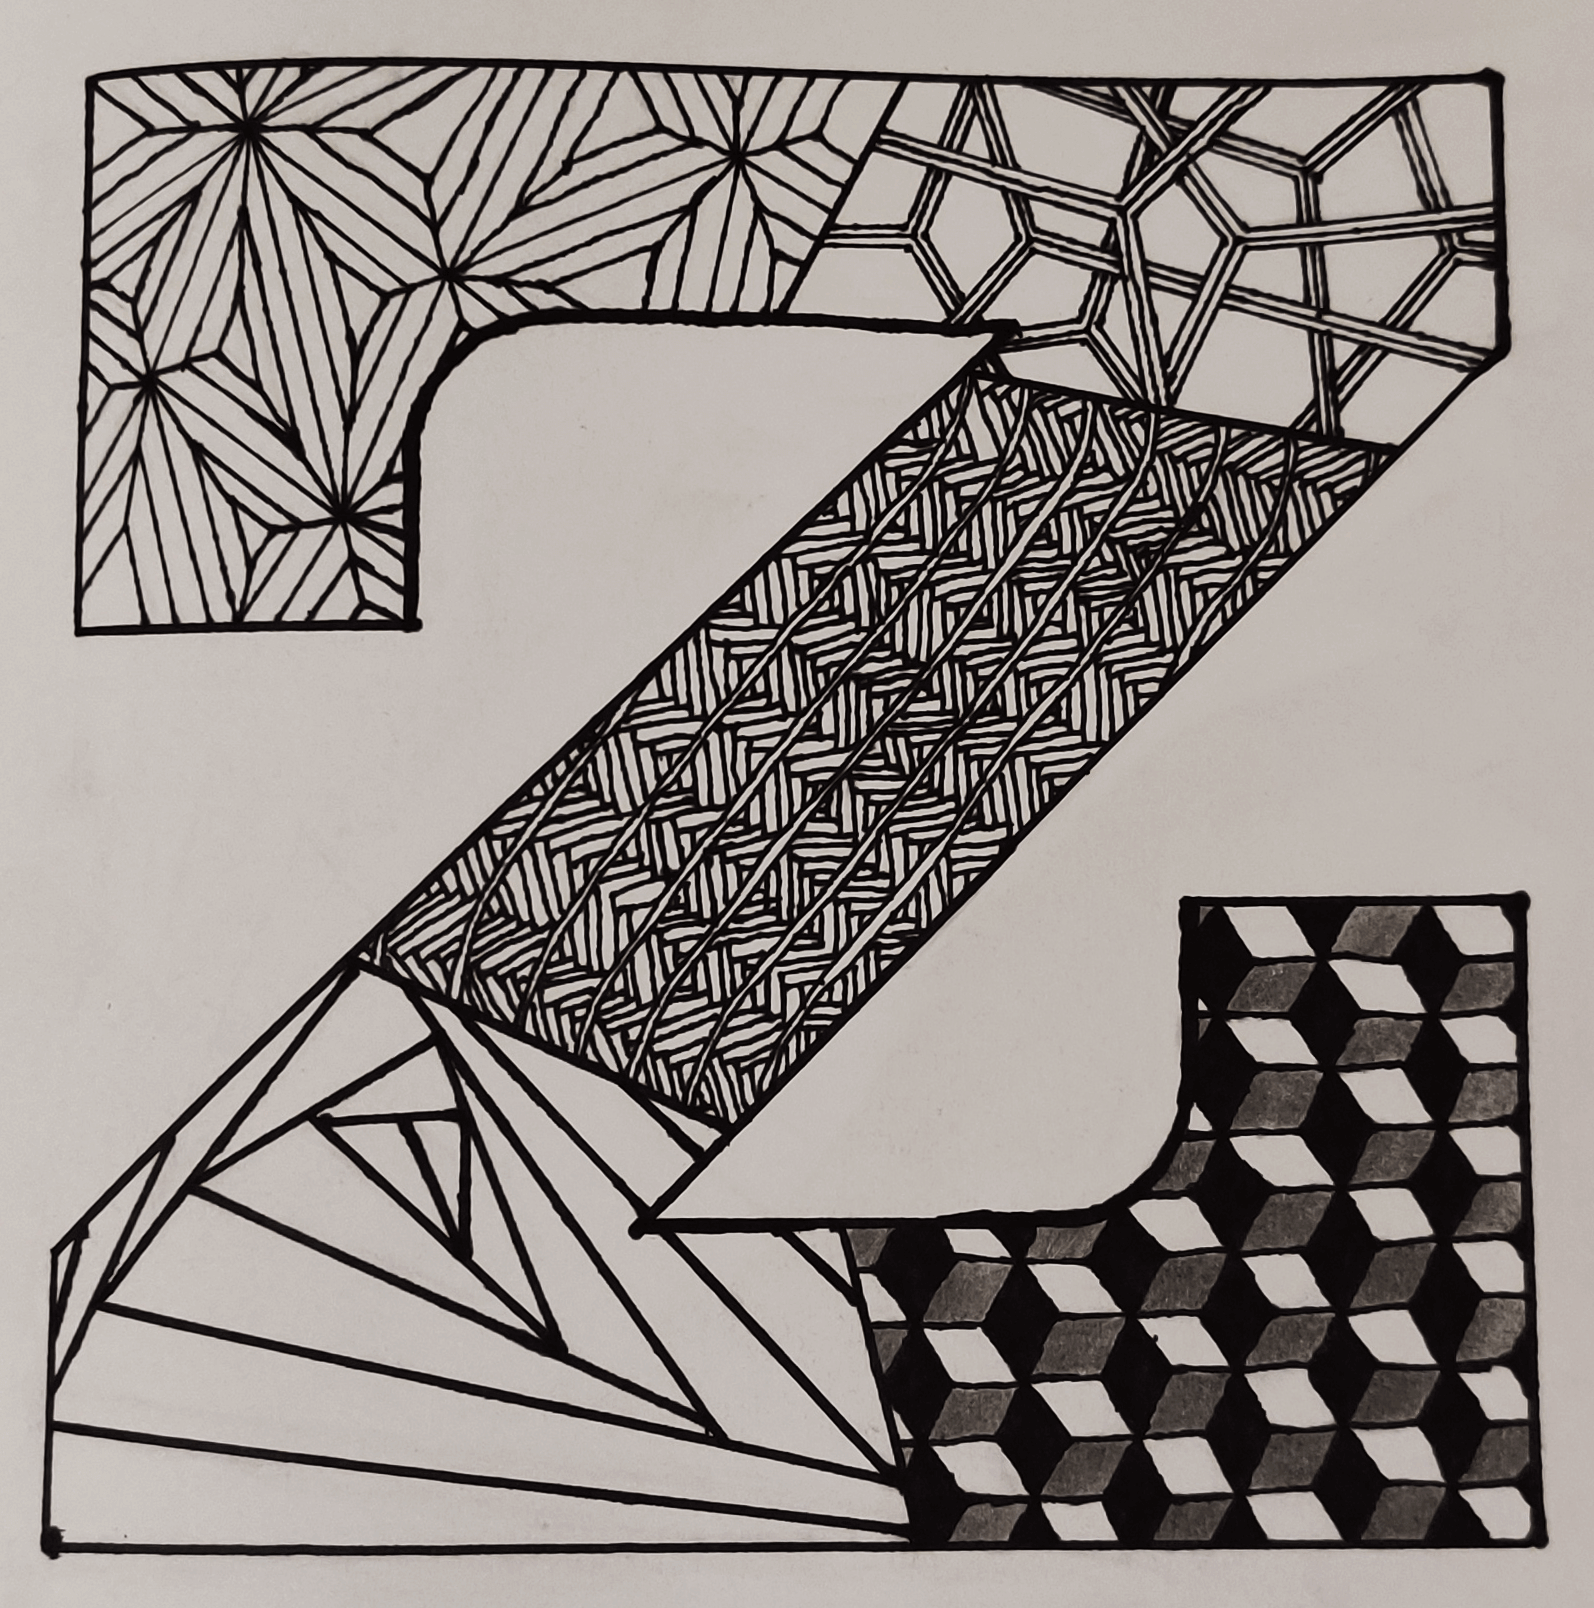 A block-text drawing of the letter ‘Z’ filled in with Zentangle patterns.